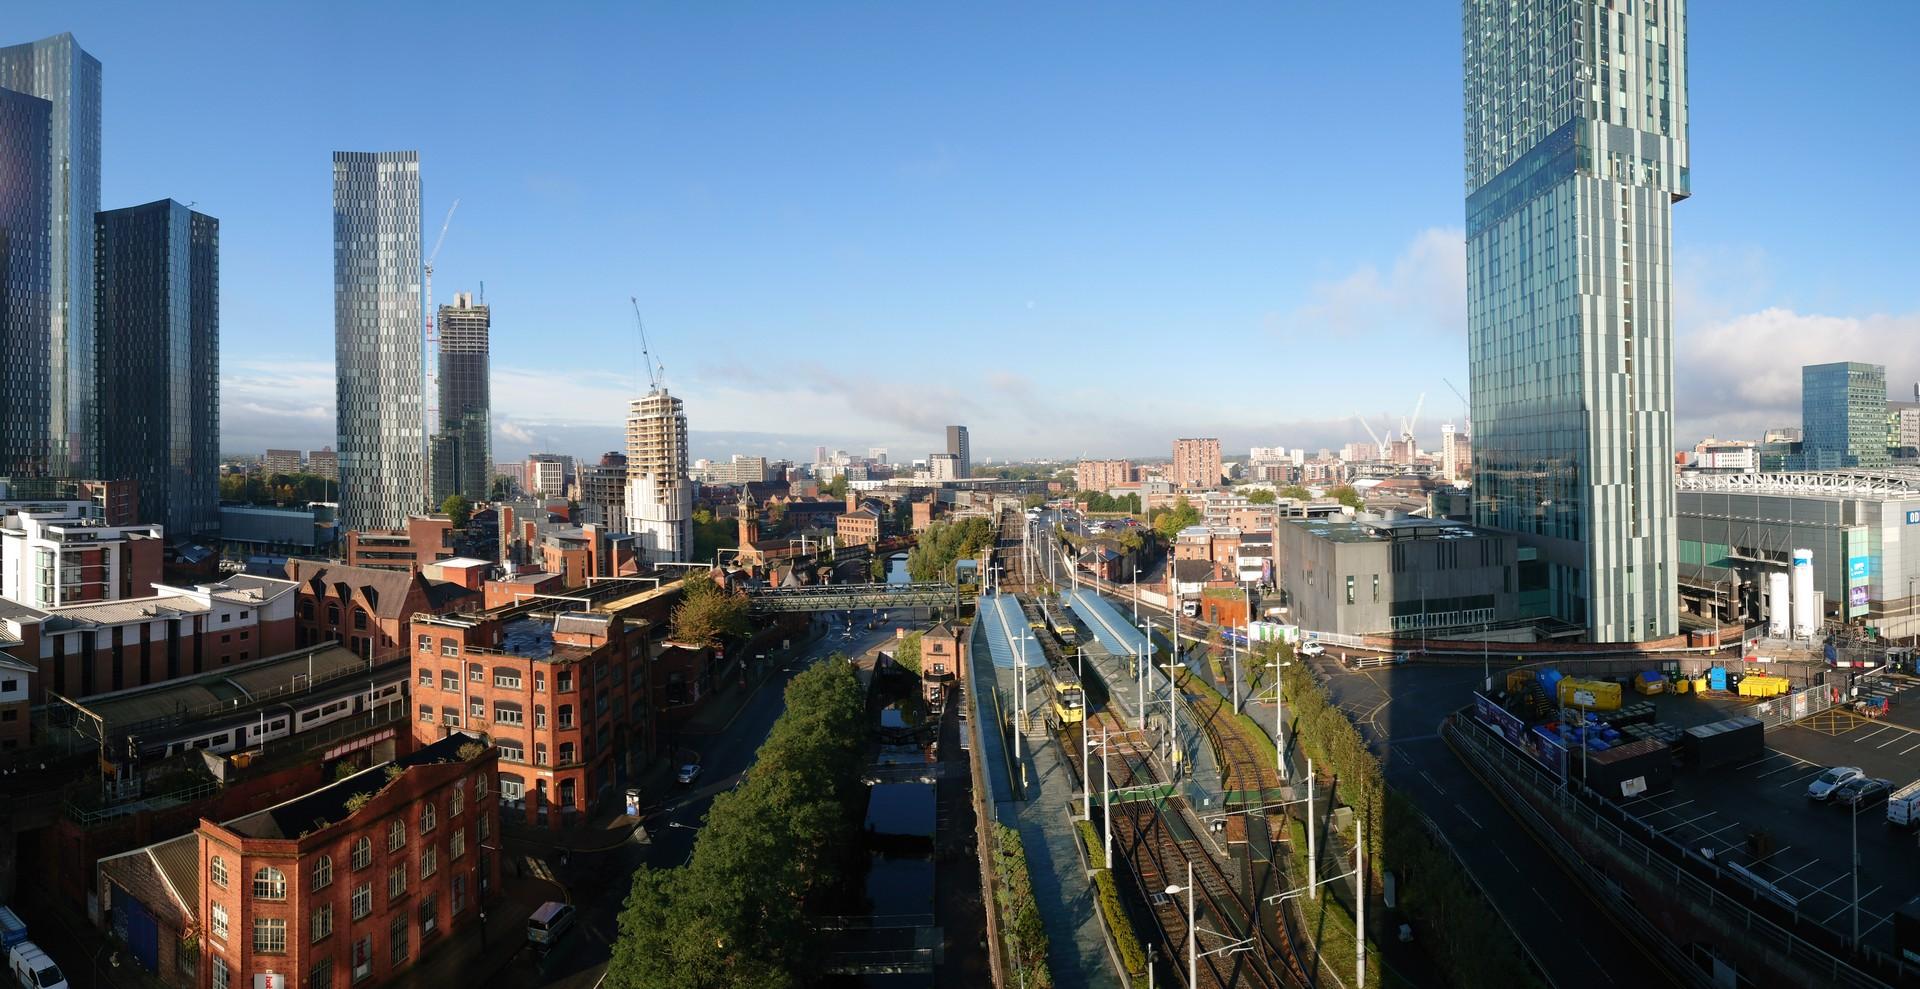 Aerial view of architecture in Manchester on a sunny day with some clouds